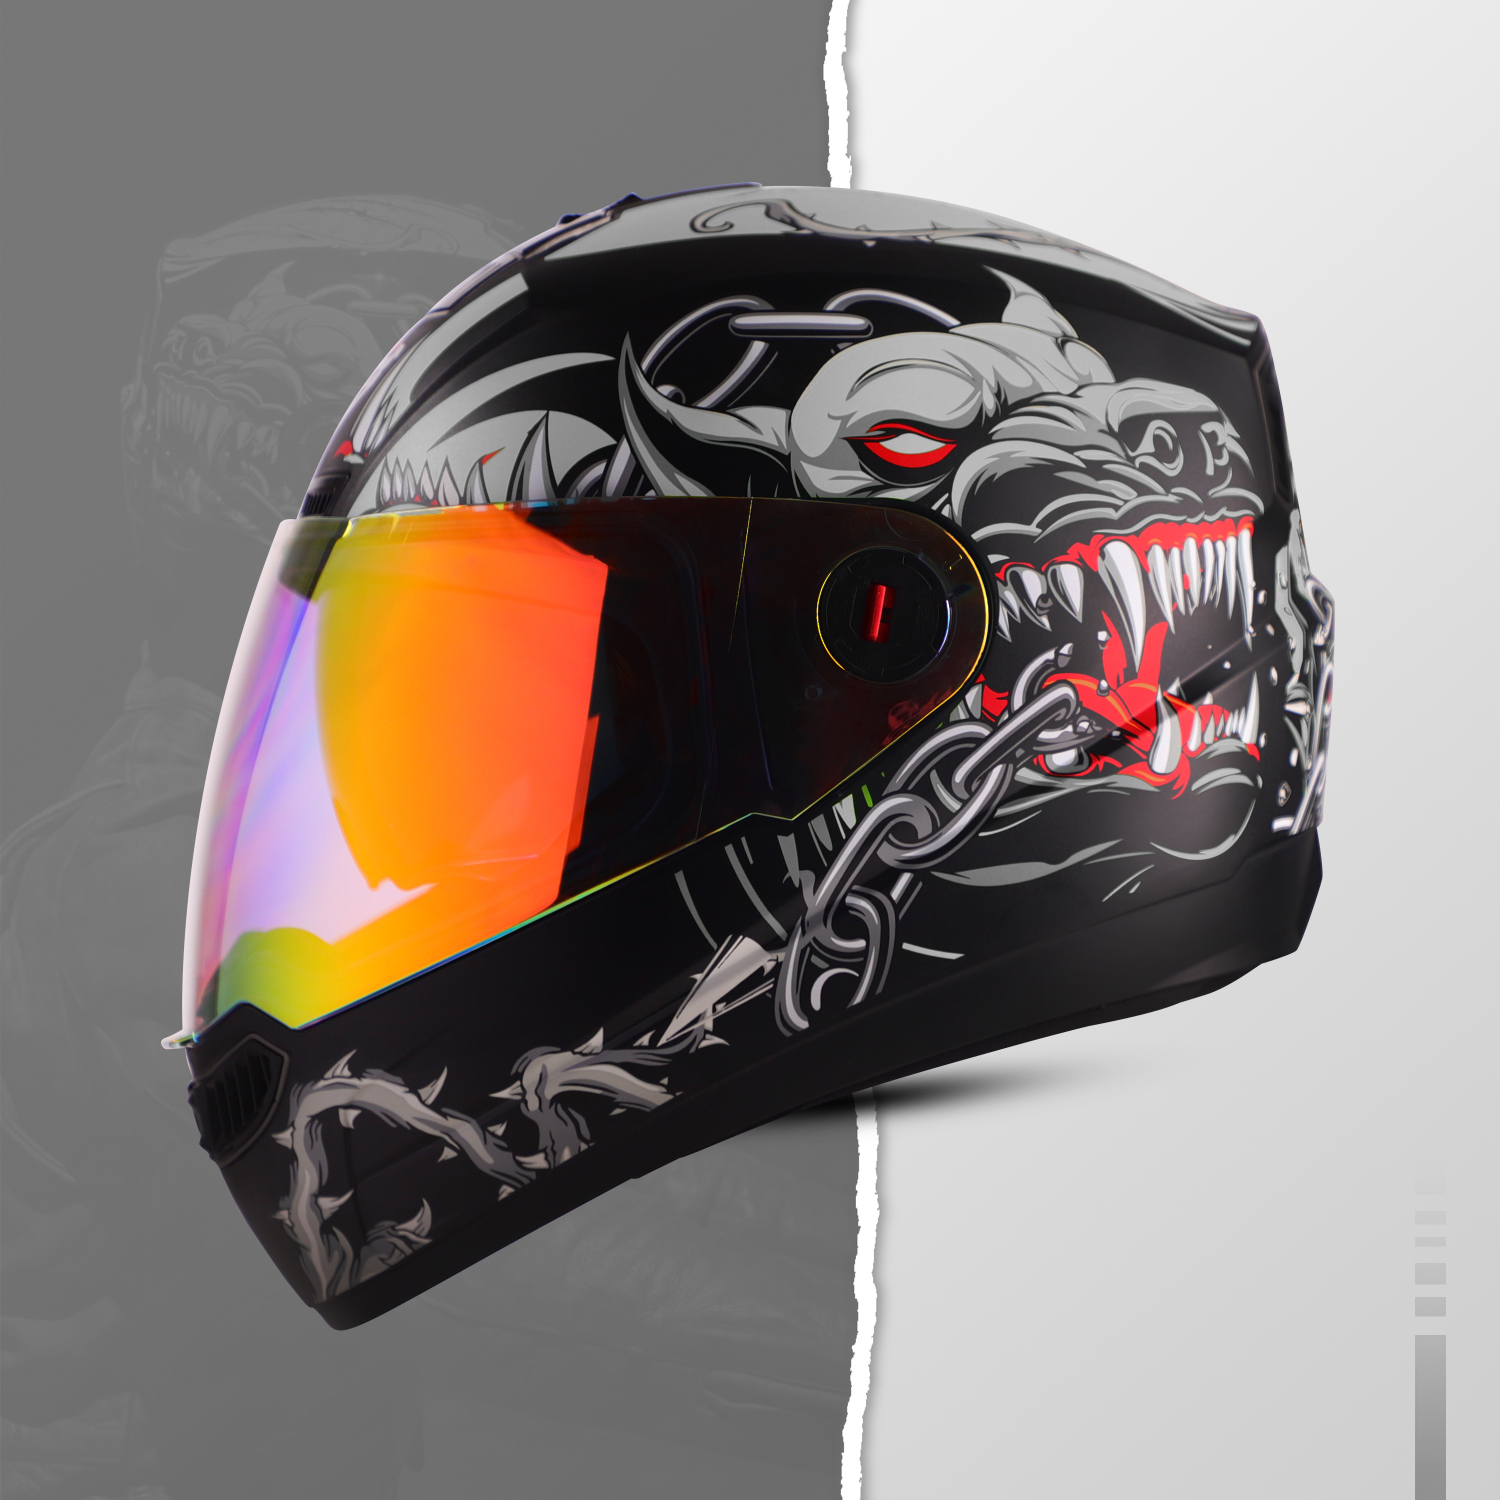 Steelbird SBA-1 Angry Dog ISI Certified Full Face Graphic Helmet For Men And Women With Inner Smoke Sun Shield (Matt Black Grey With Night Vision Gold Visor)